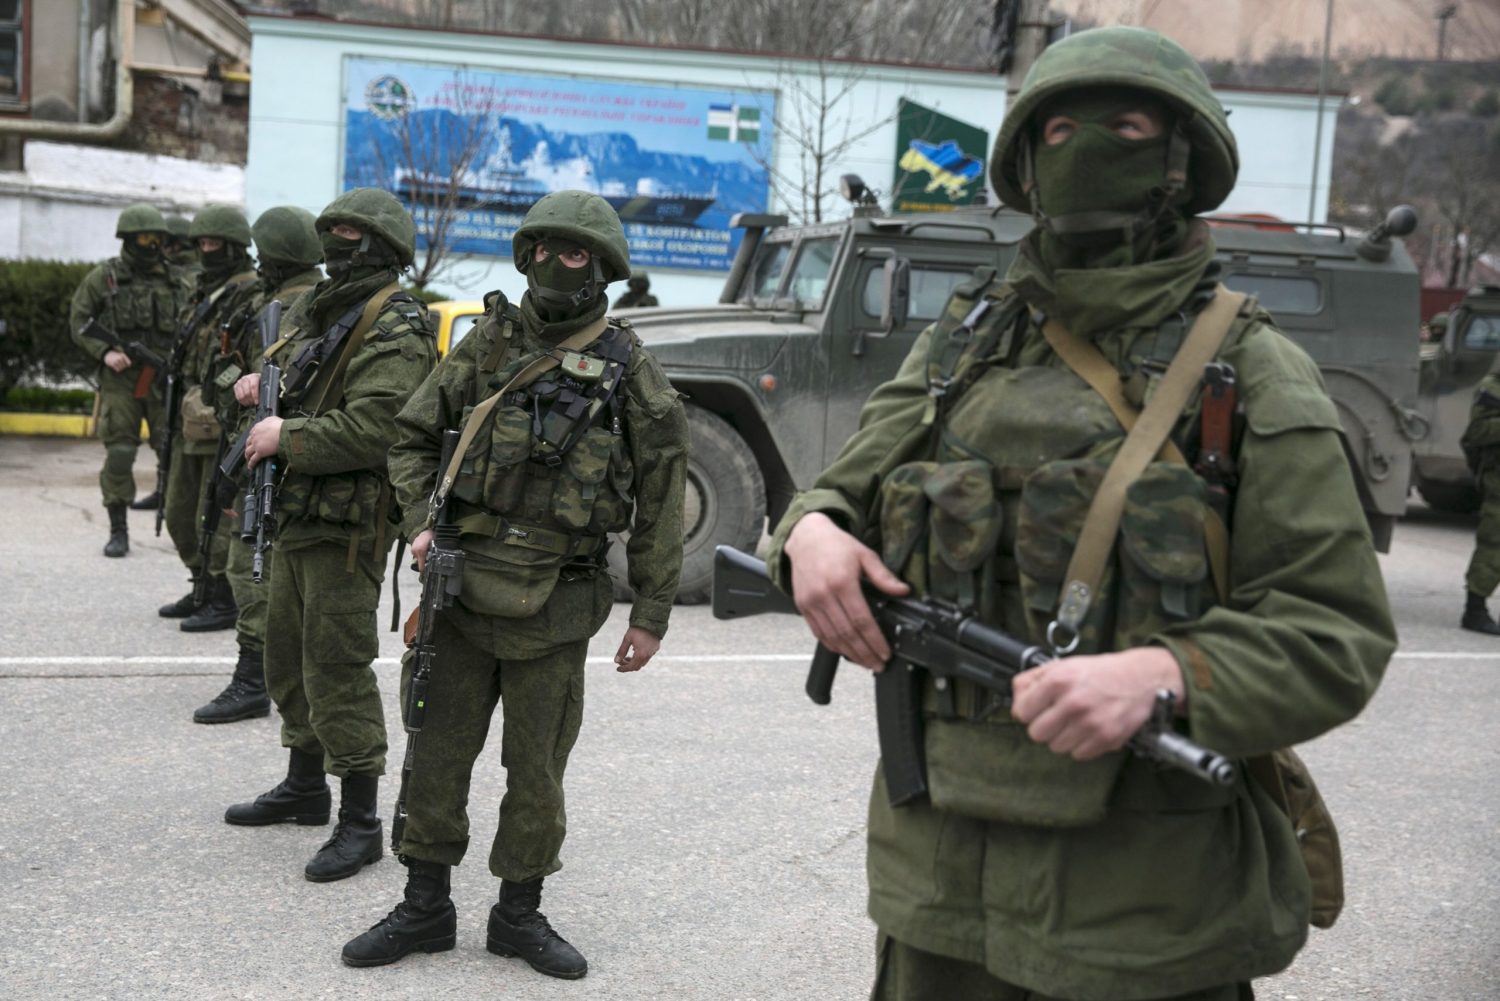 The lesson of Crimea: Appeasement never works